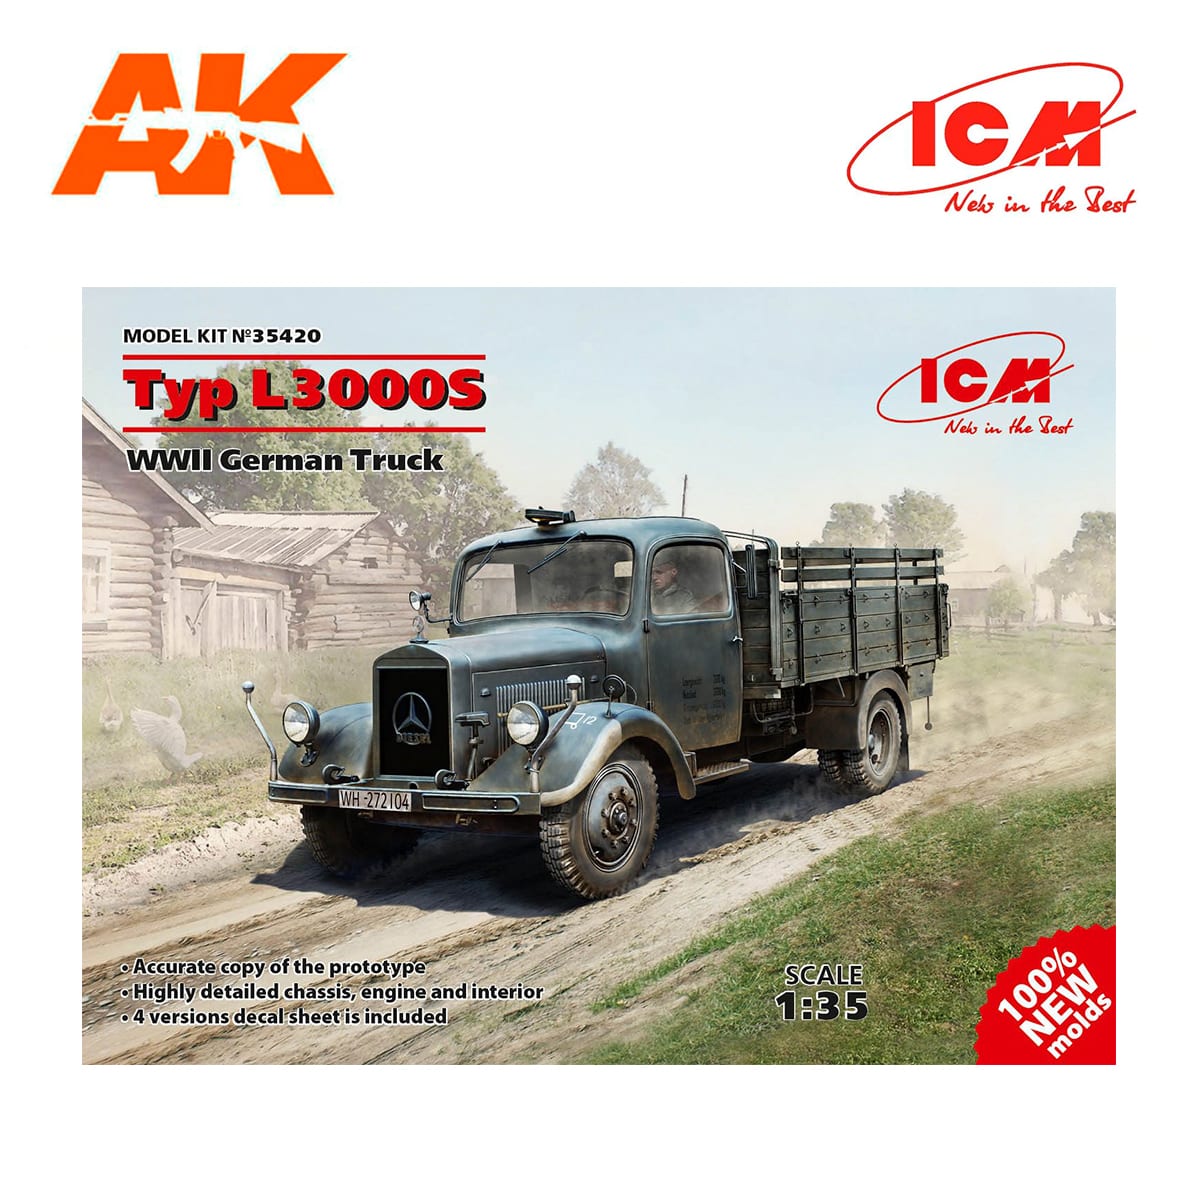 Typ L3000S, WWII German Truck (100% new molds) 1/35